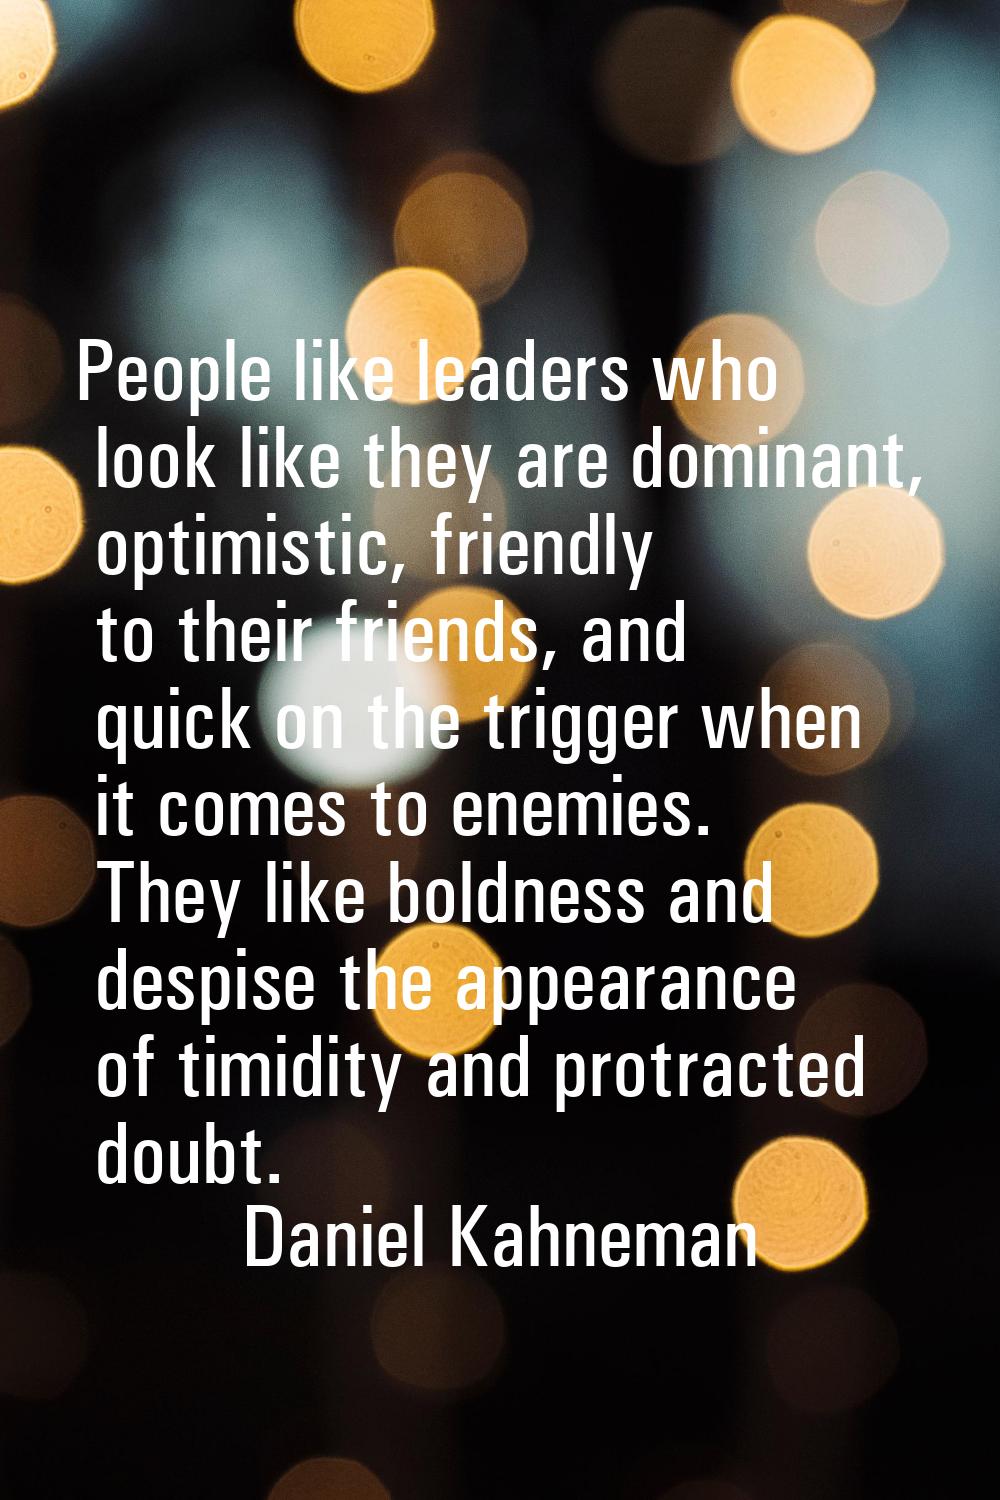 People like leaders who look like they are dominant, optimistic, friendly to their friends, and qui